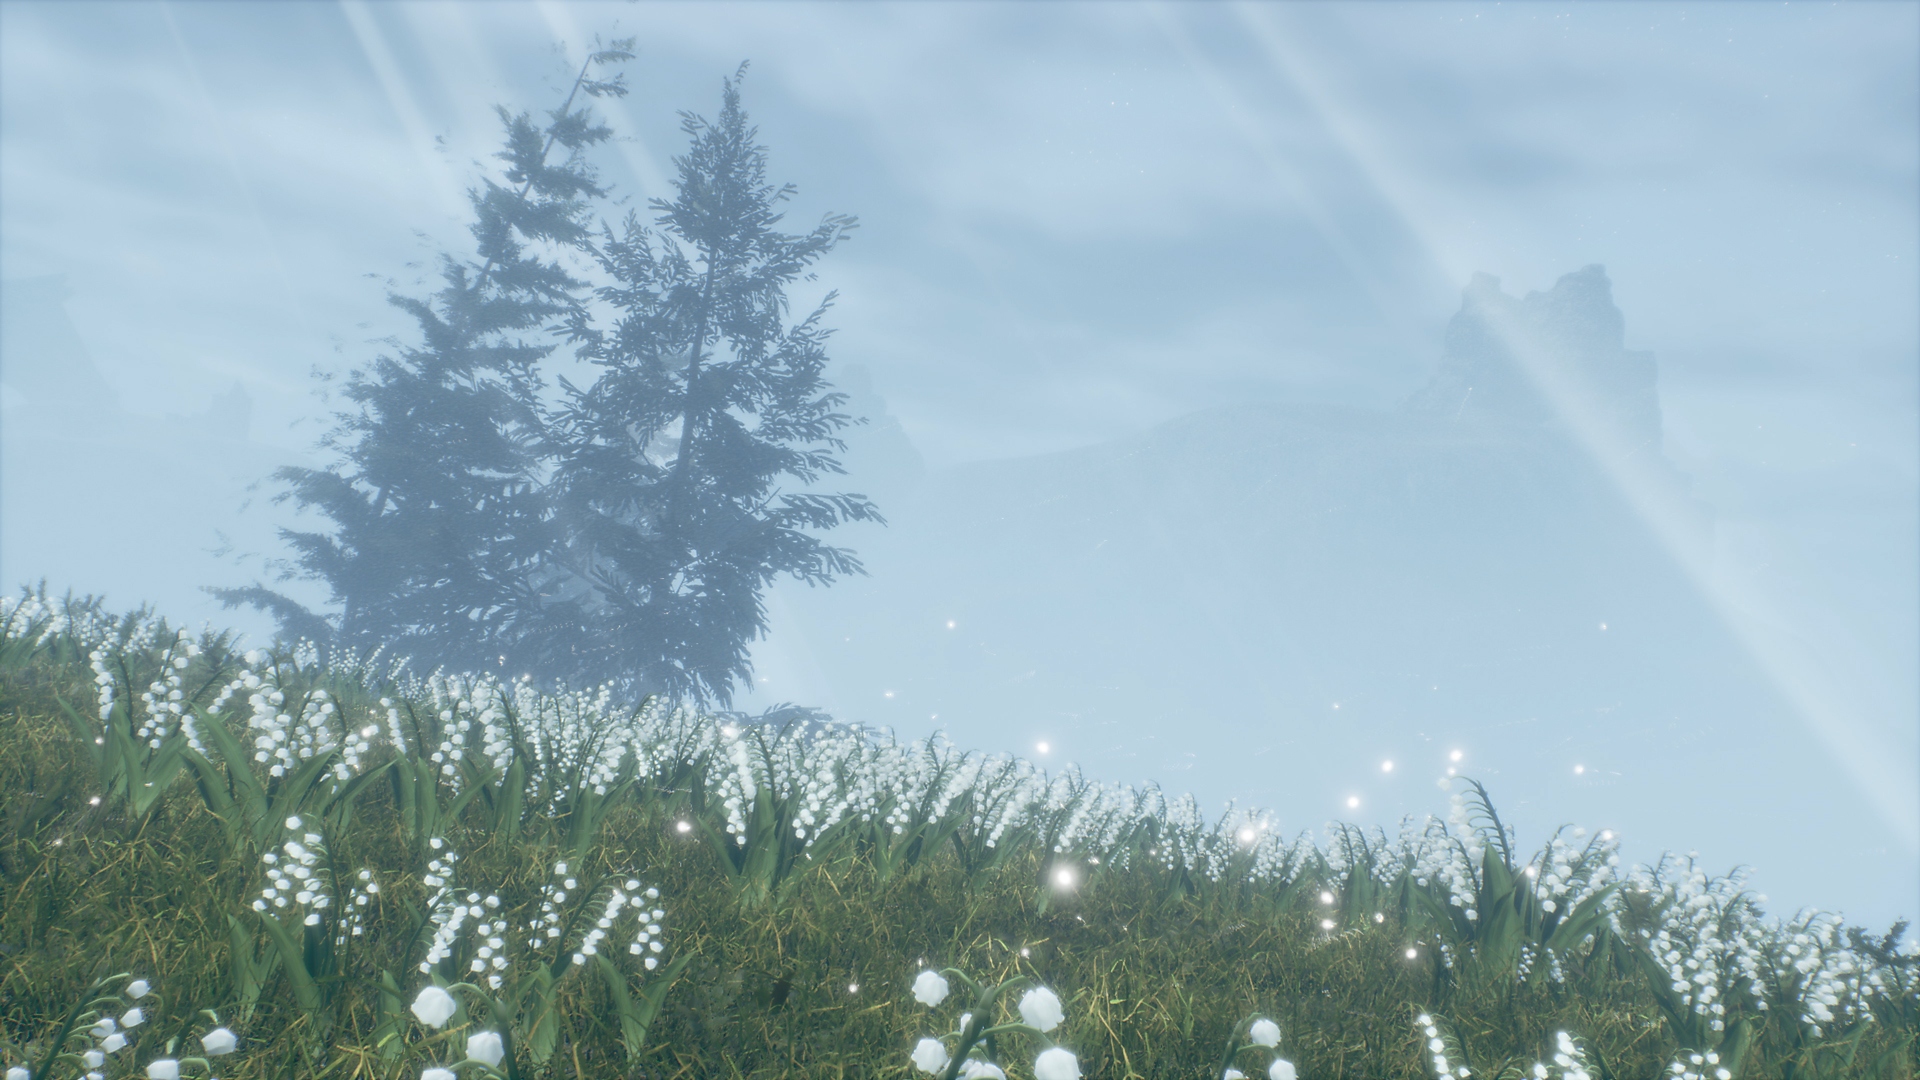 Valkyrie Elysium screenshot showing two trees in a grassy area